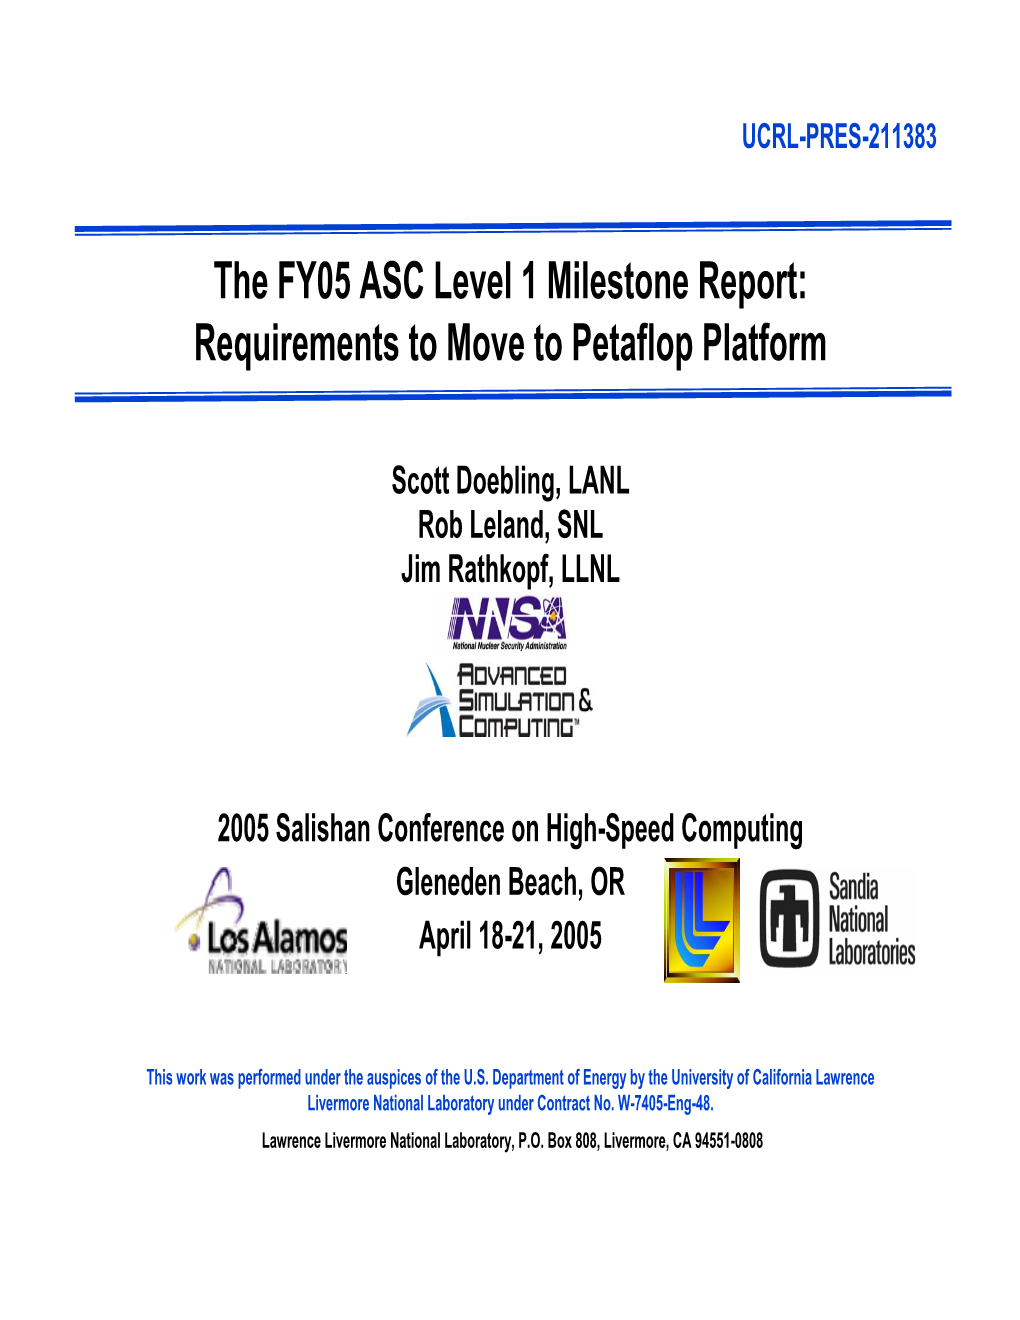 The FY05 ASC Level 1 Milestone Report: Requirements to Move to Petaflop Platform